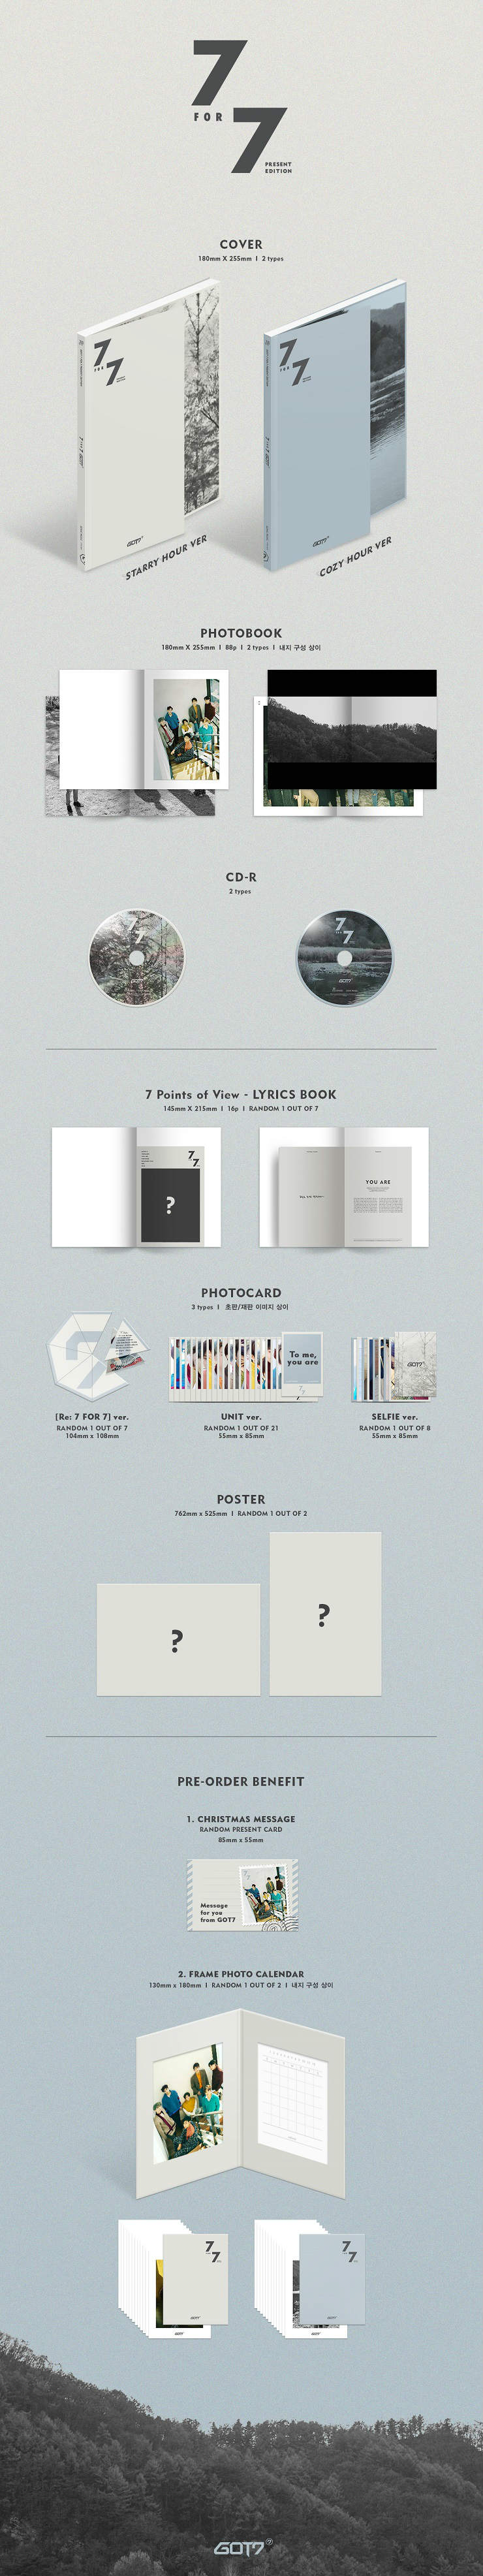 GOT7 - 7 FOR 7 PRESENT EDITION []